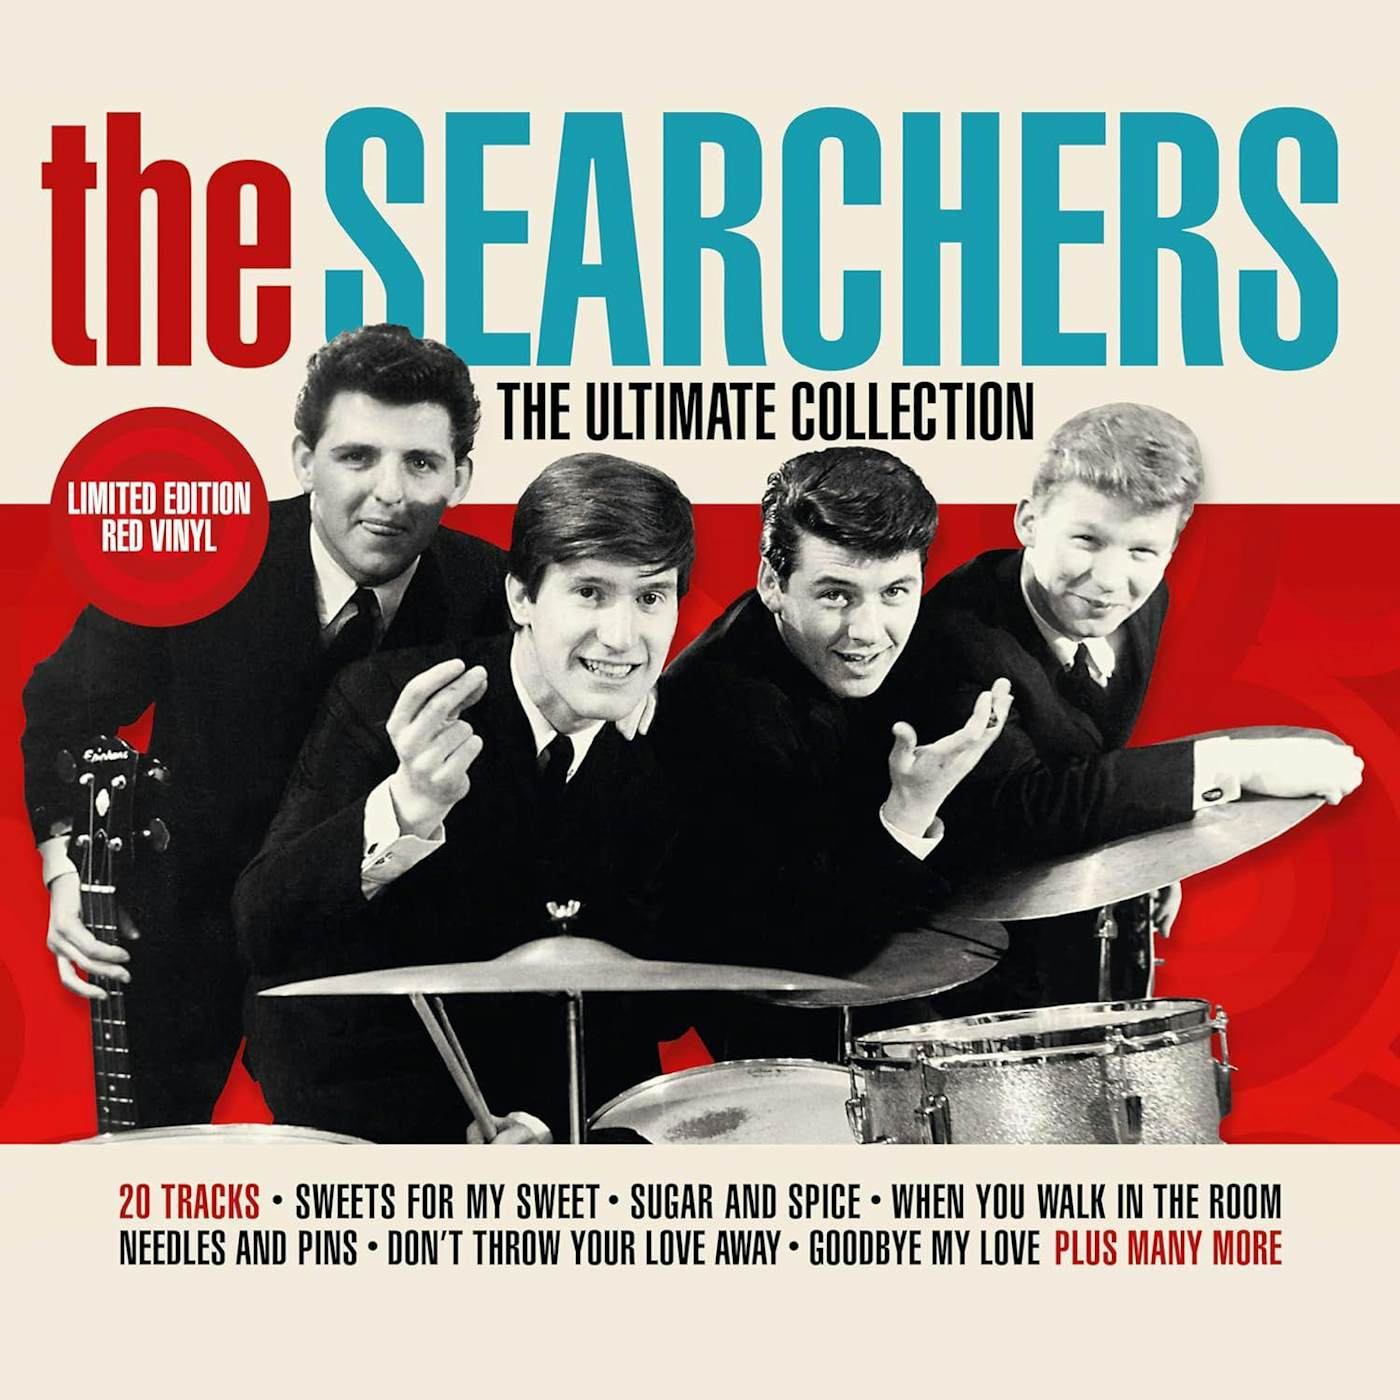 The Searchers Ultimate Collection Vinyl Record